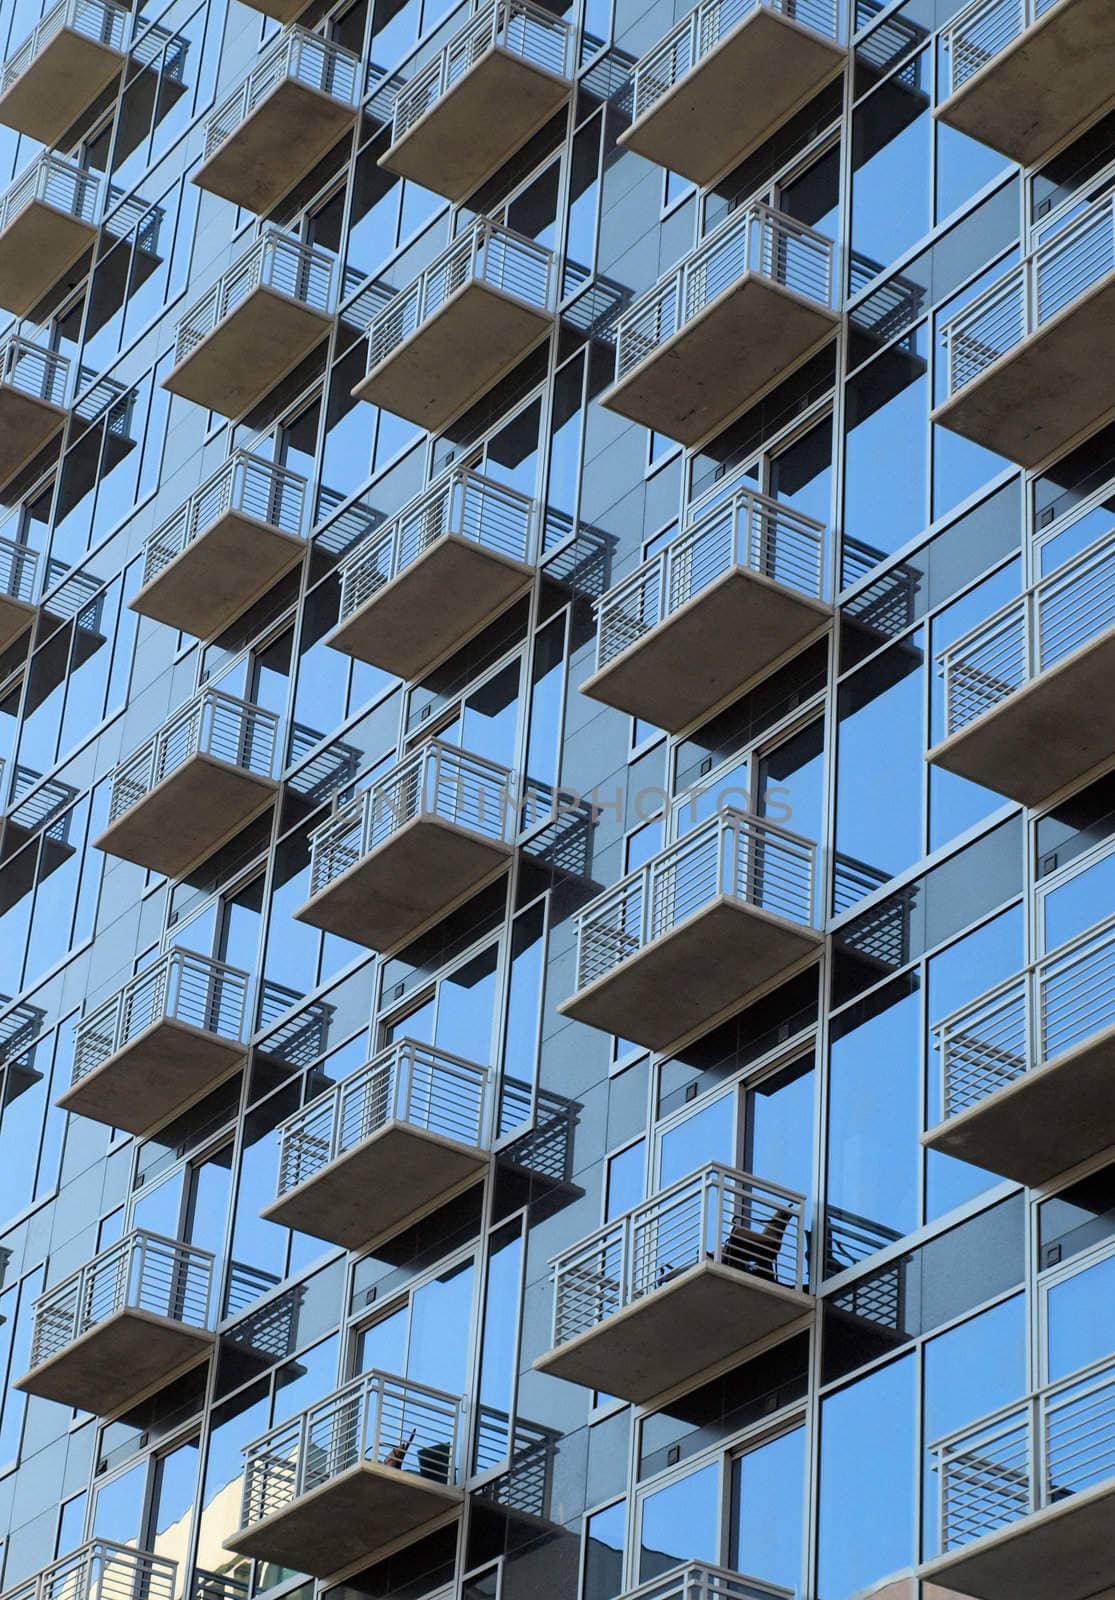 A view of window porches in an urban high rise